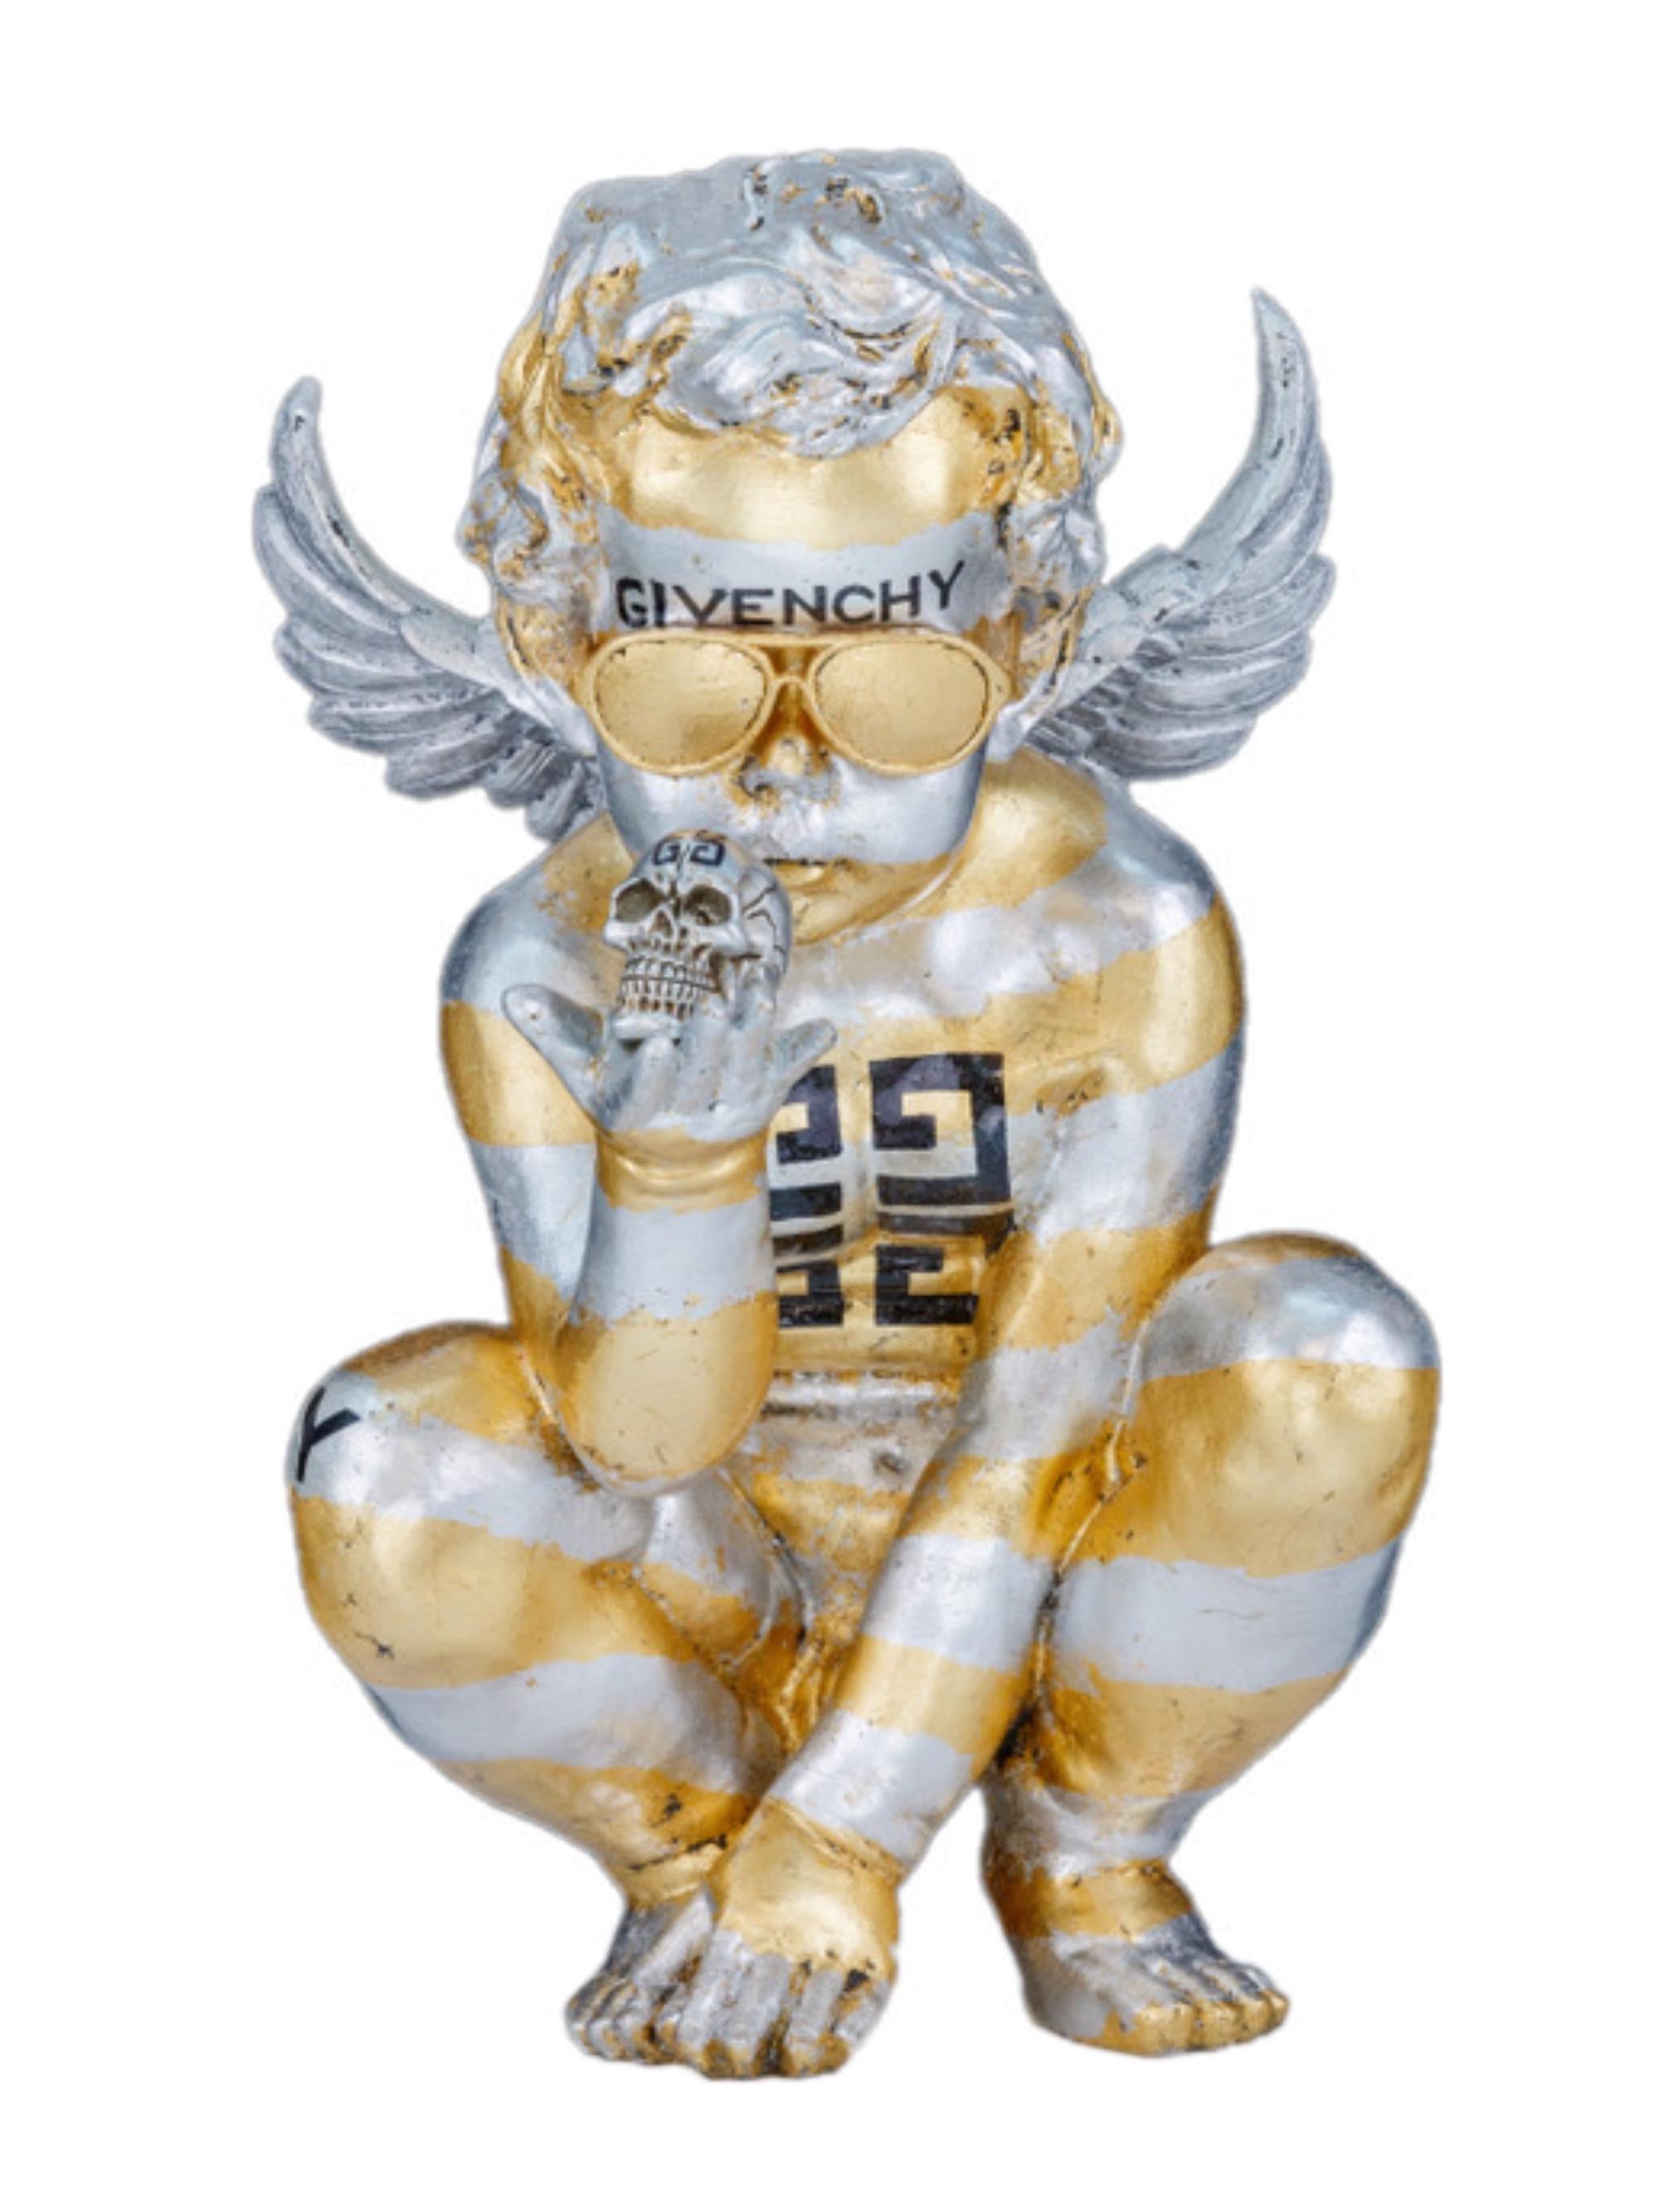 Gold and Silver GIV “Naughty Angel” - Pop Art Sculpture by jimmie martin